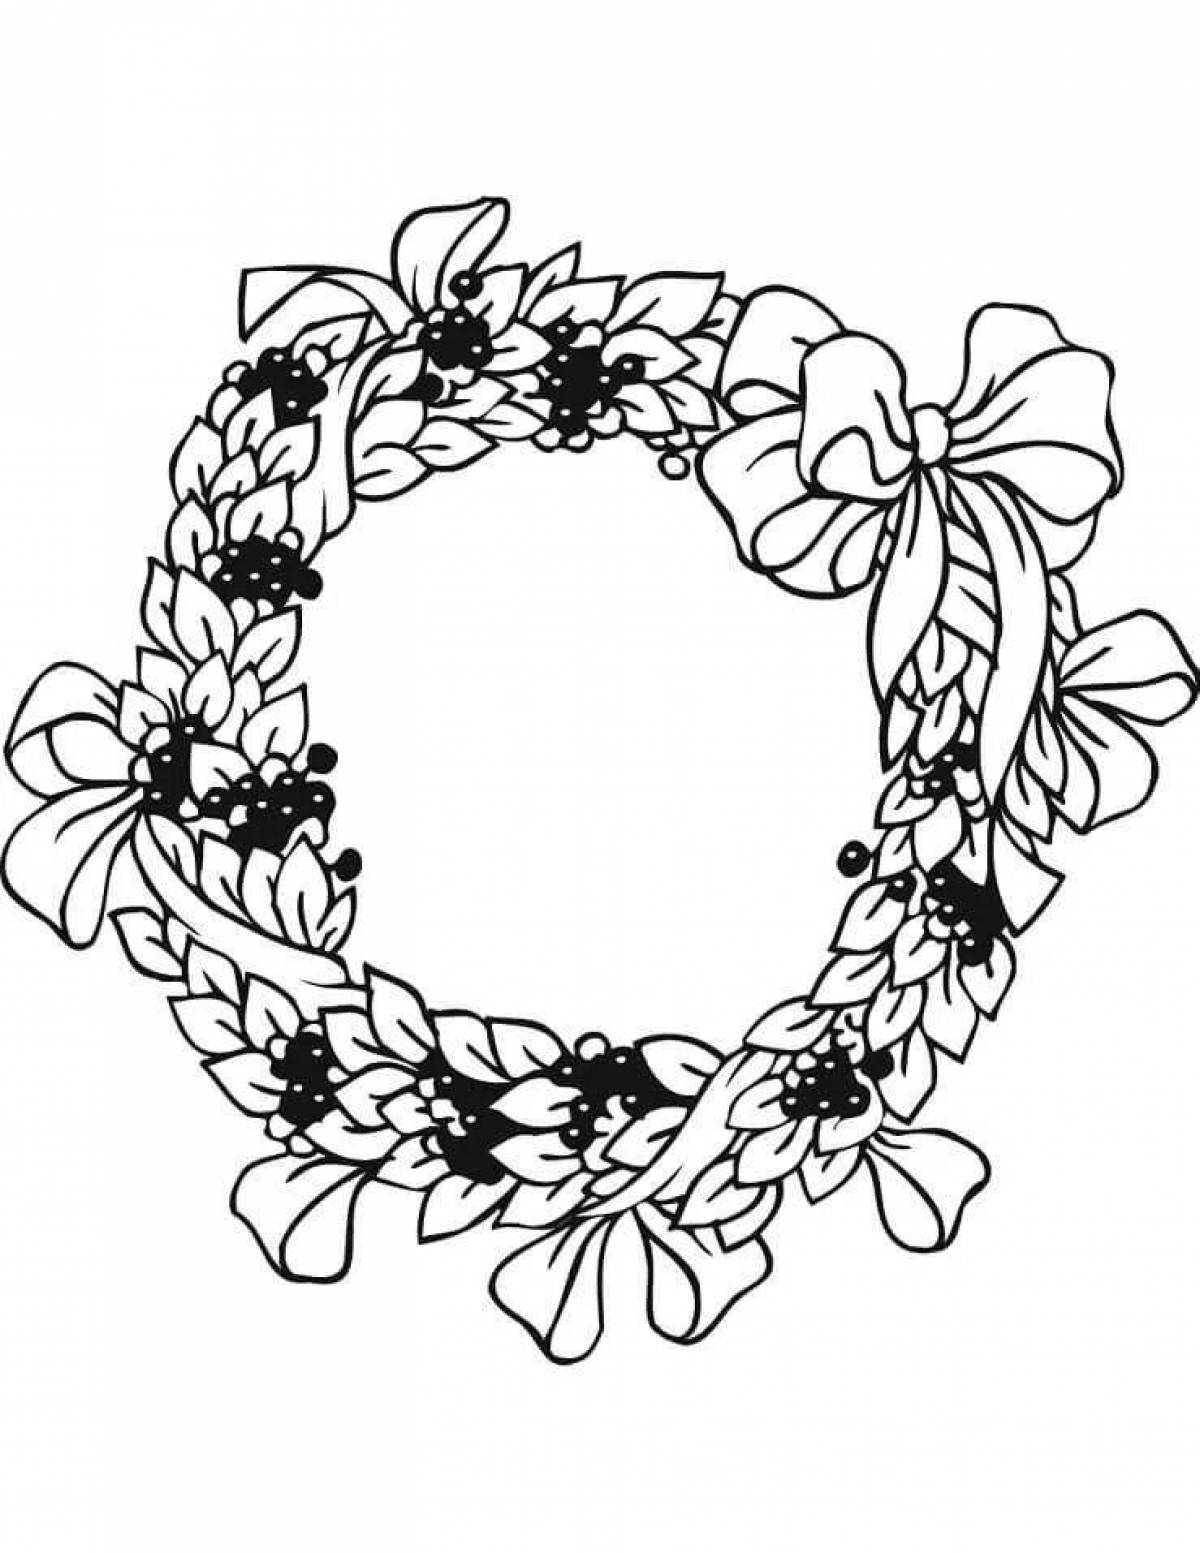 Royal wreath coloring page